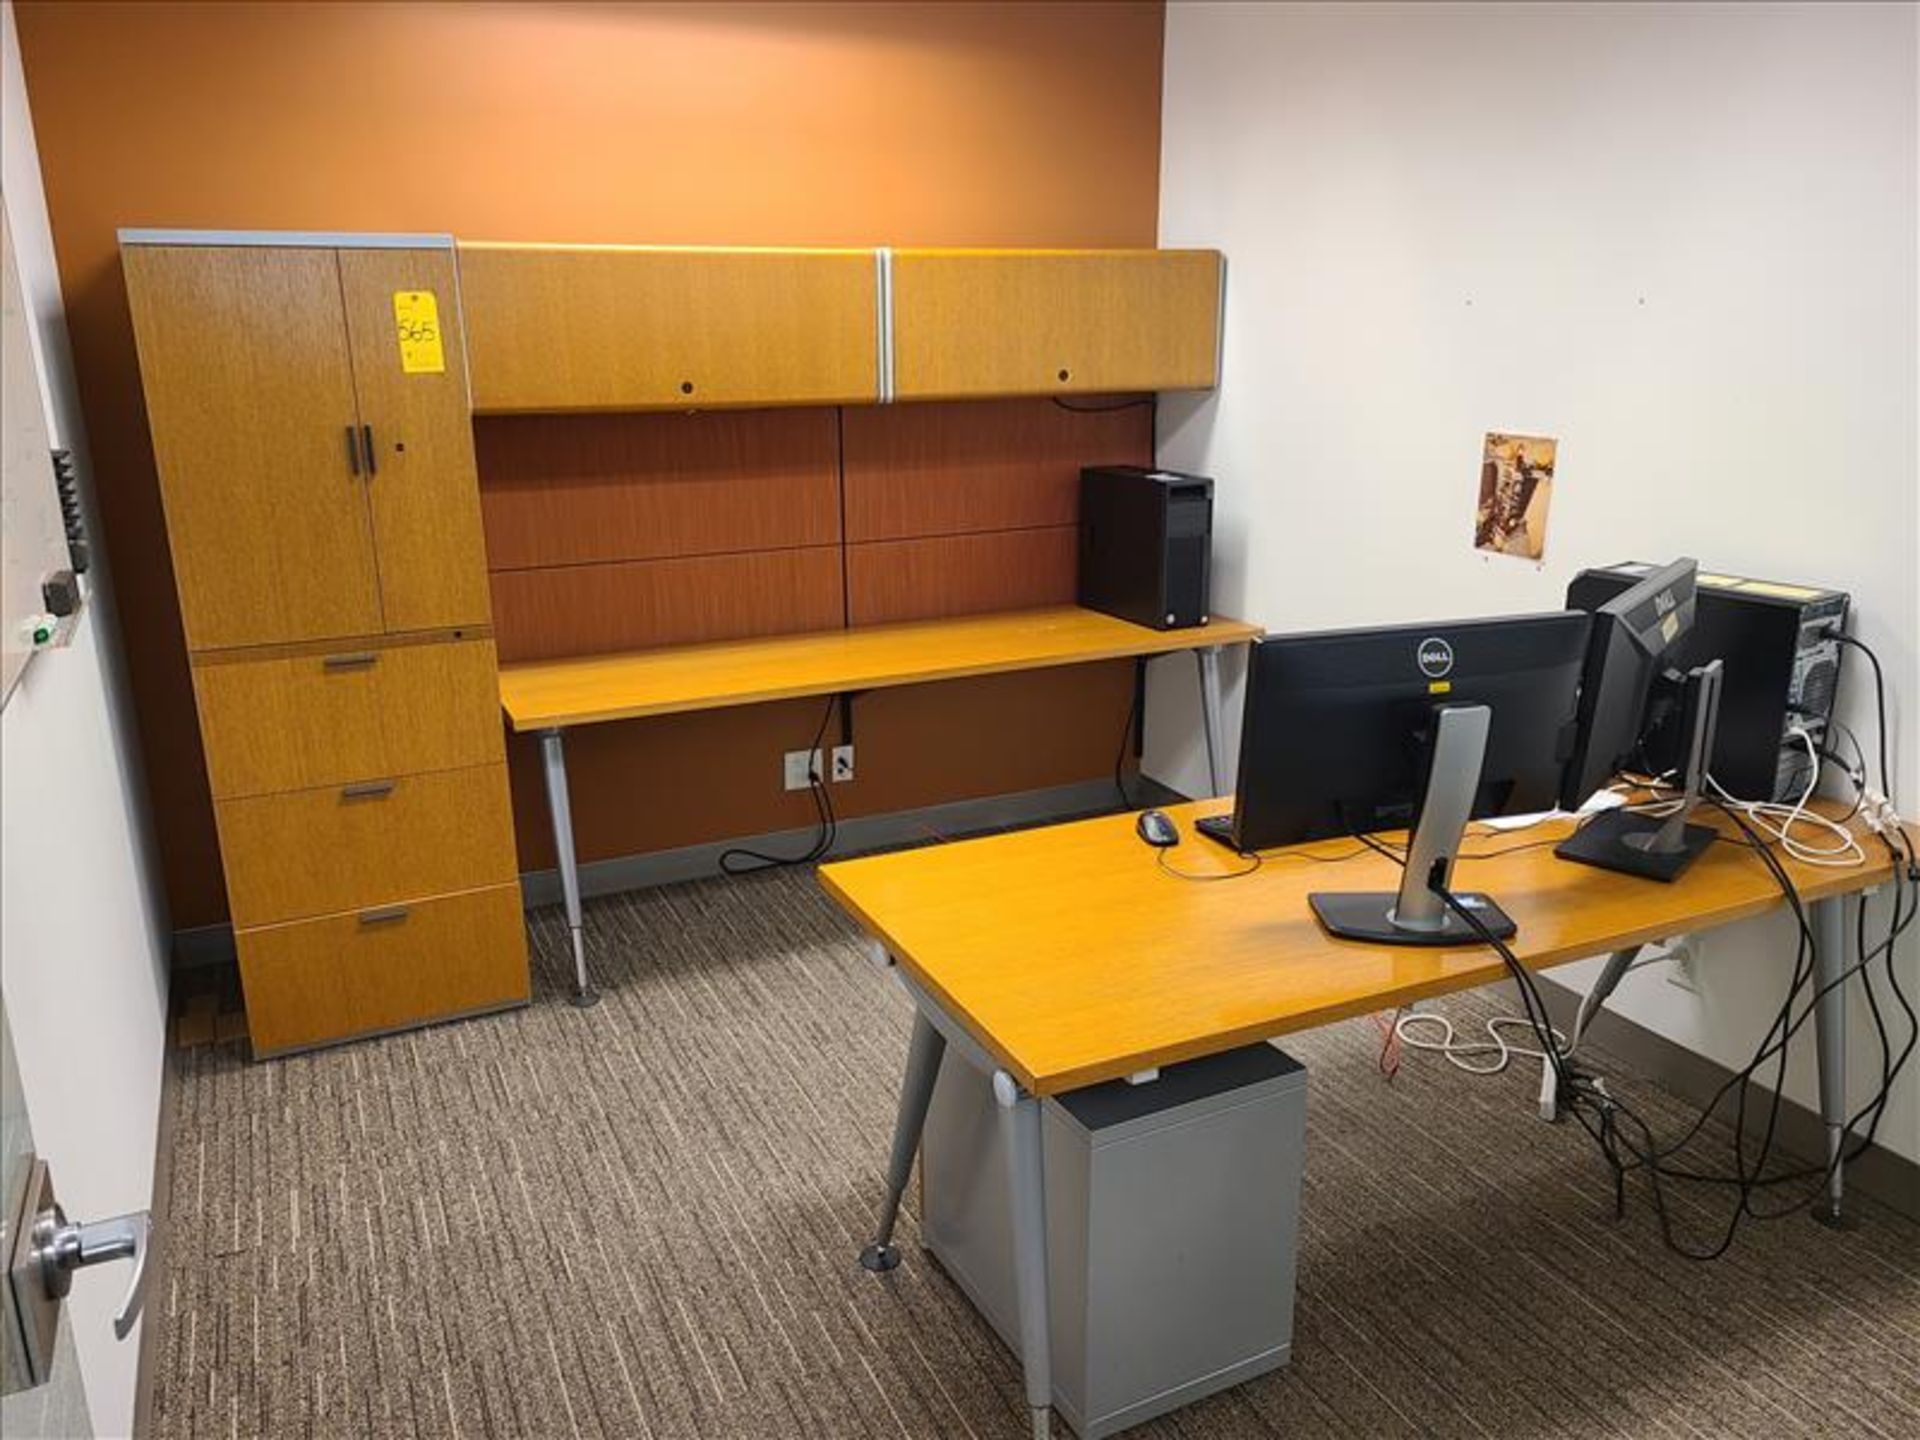 Private Office Suite incl; front desk approx. 72 in. x 30 in., back desk approx. 84 in. x 23 in., (